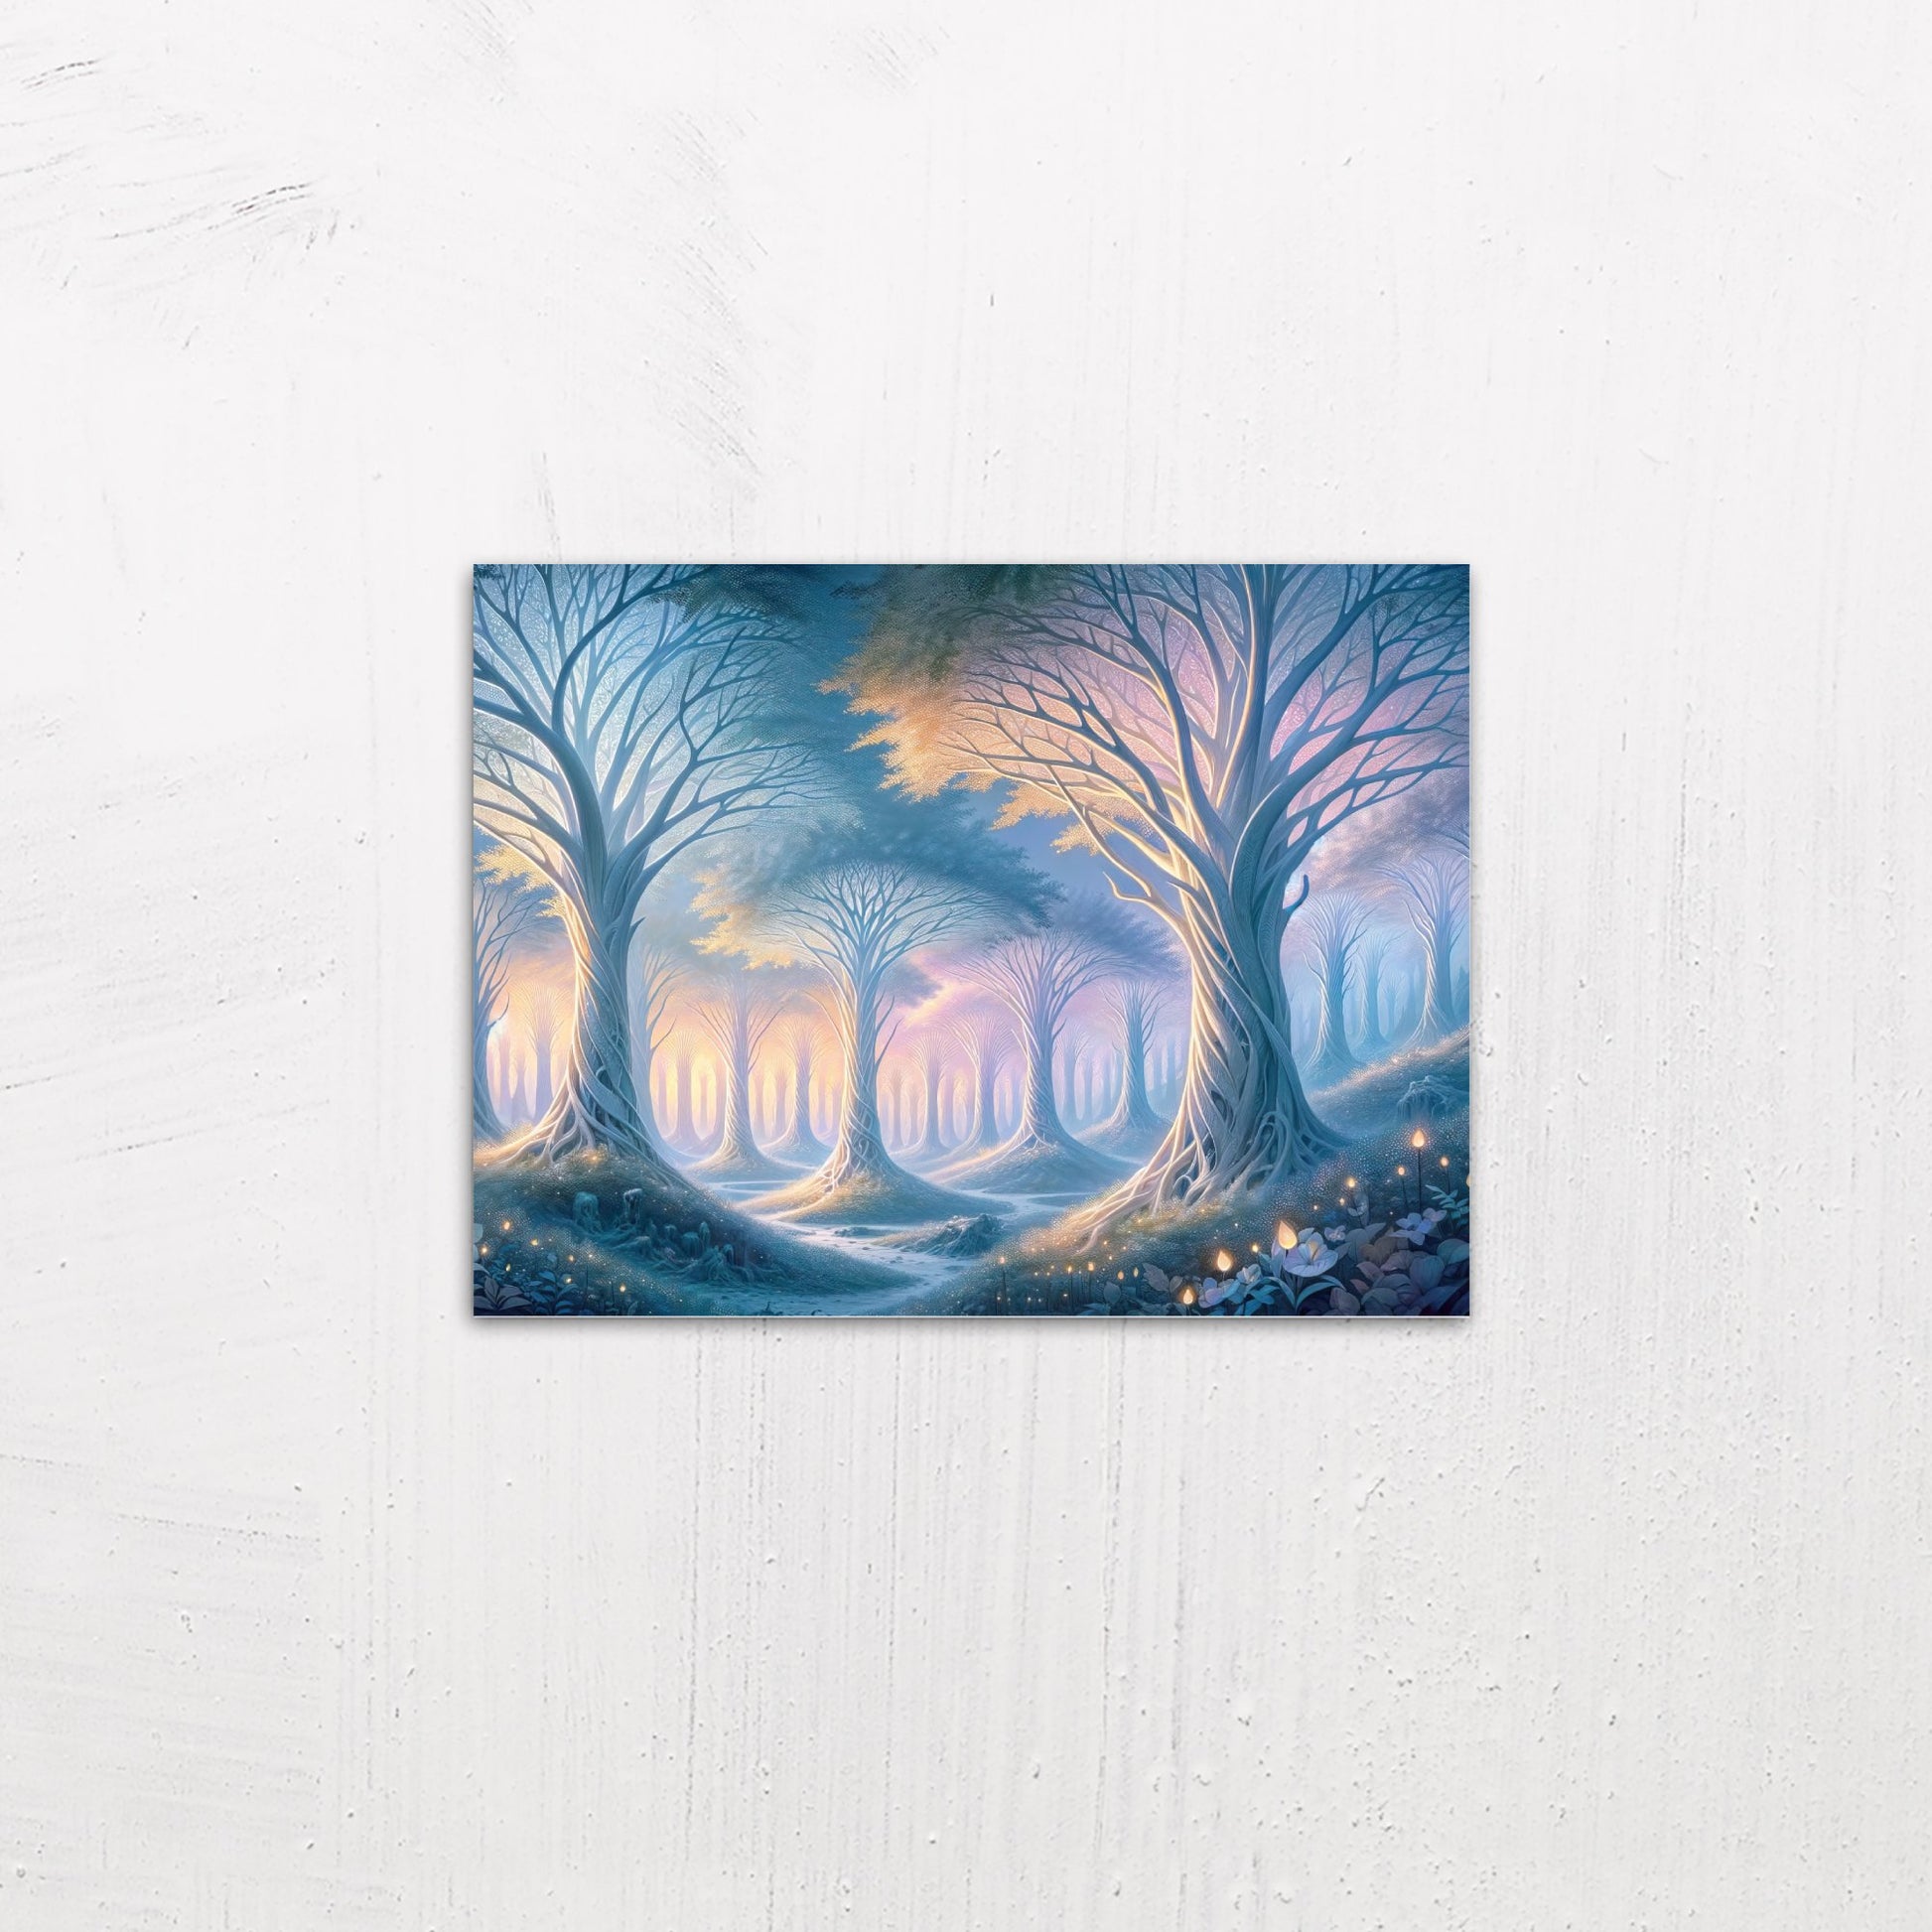 A small size metal art poster display plate with printed design of a Mystical Forest